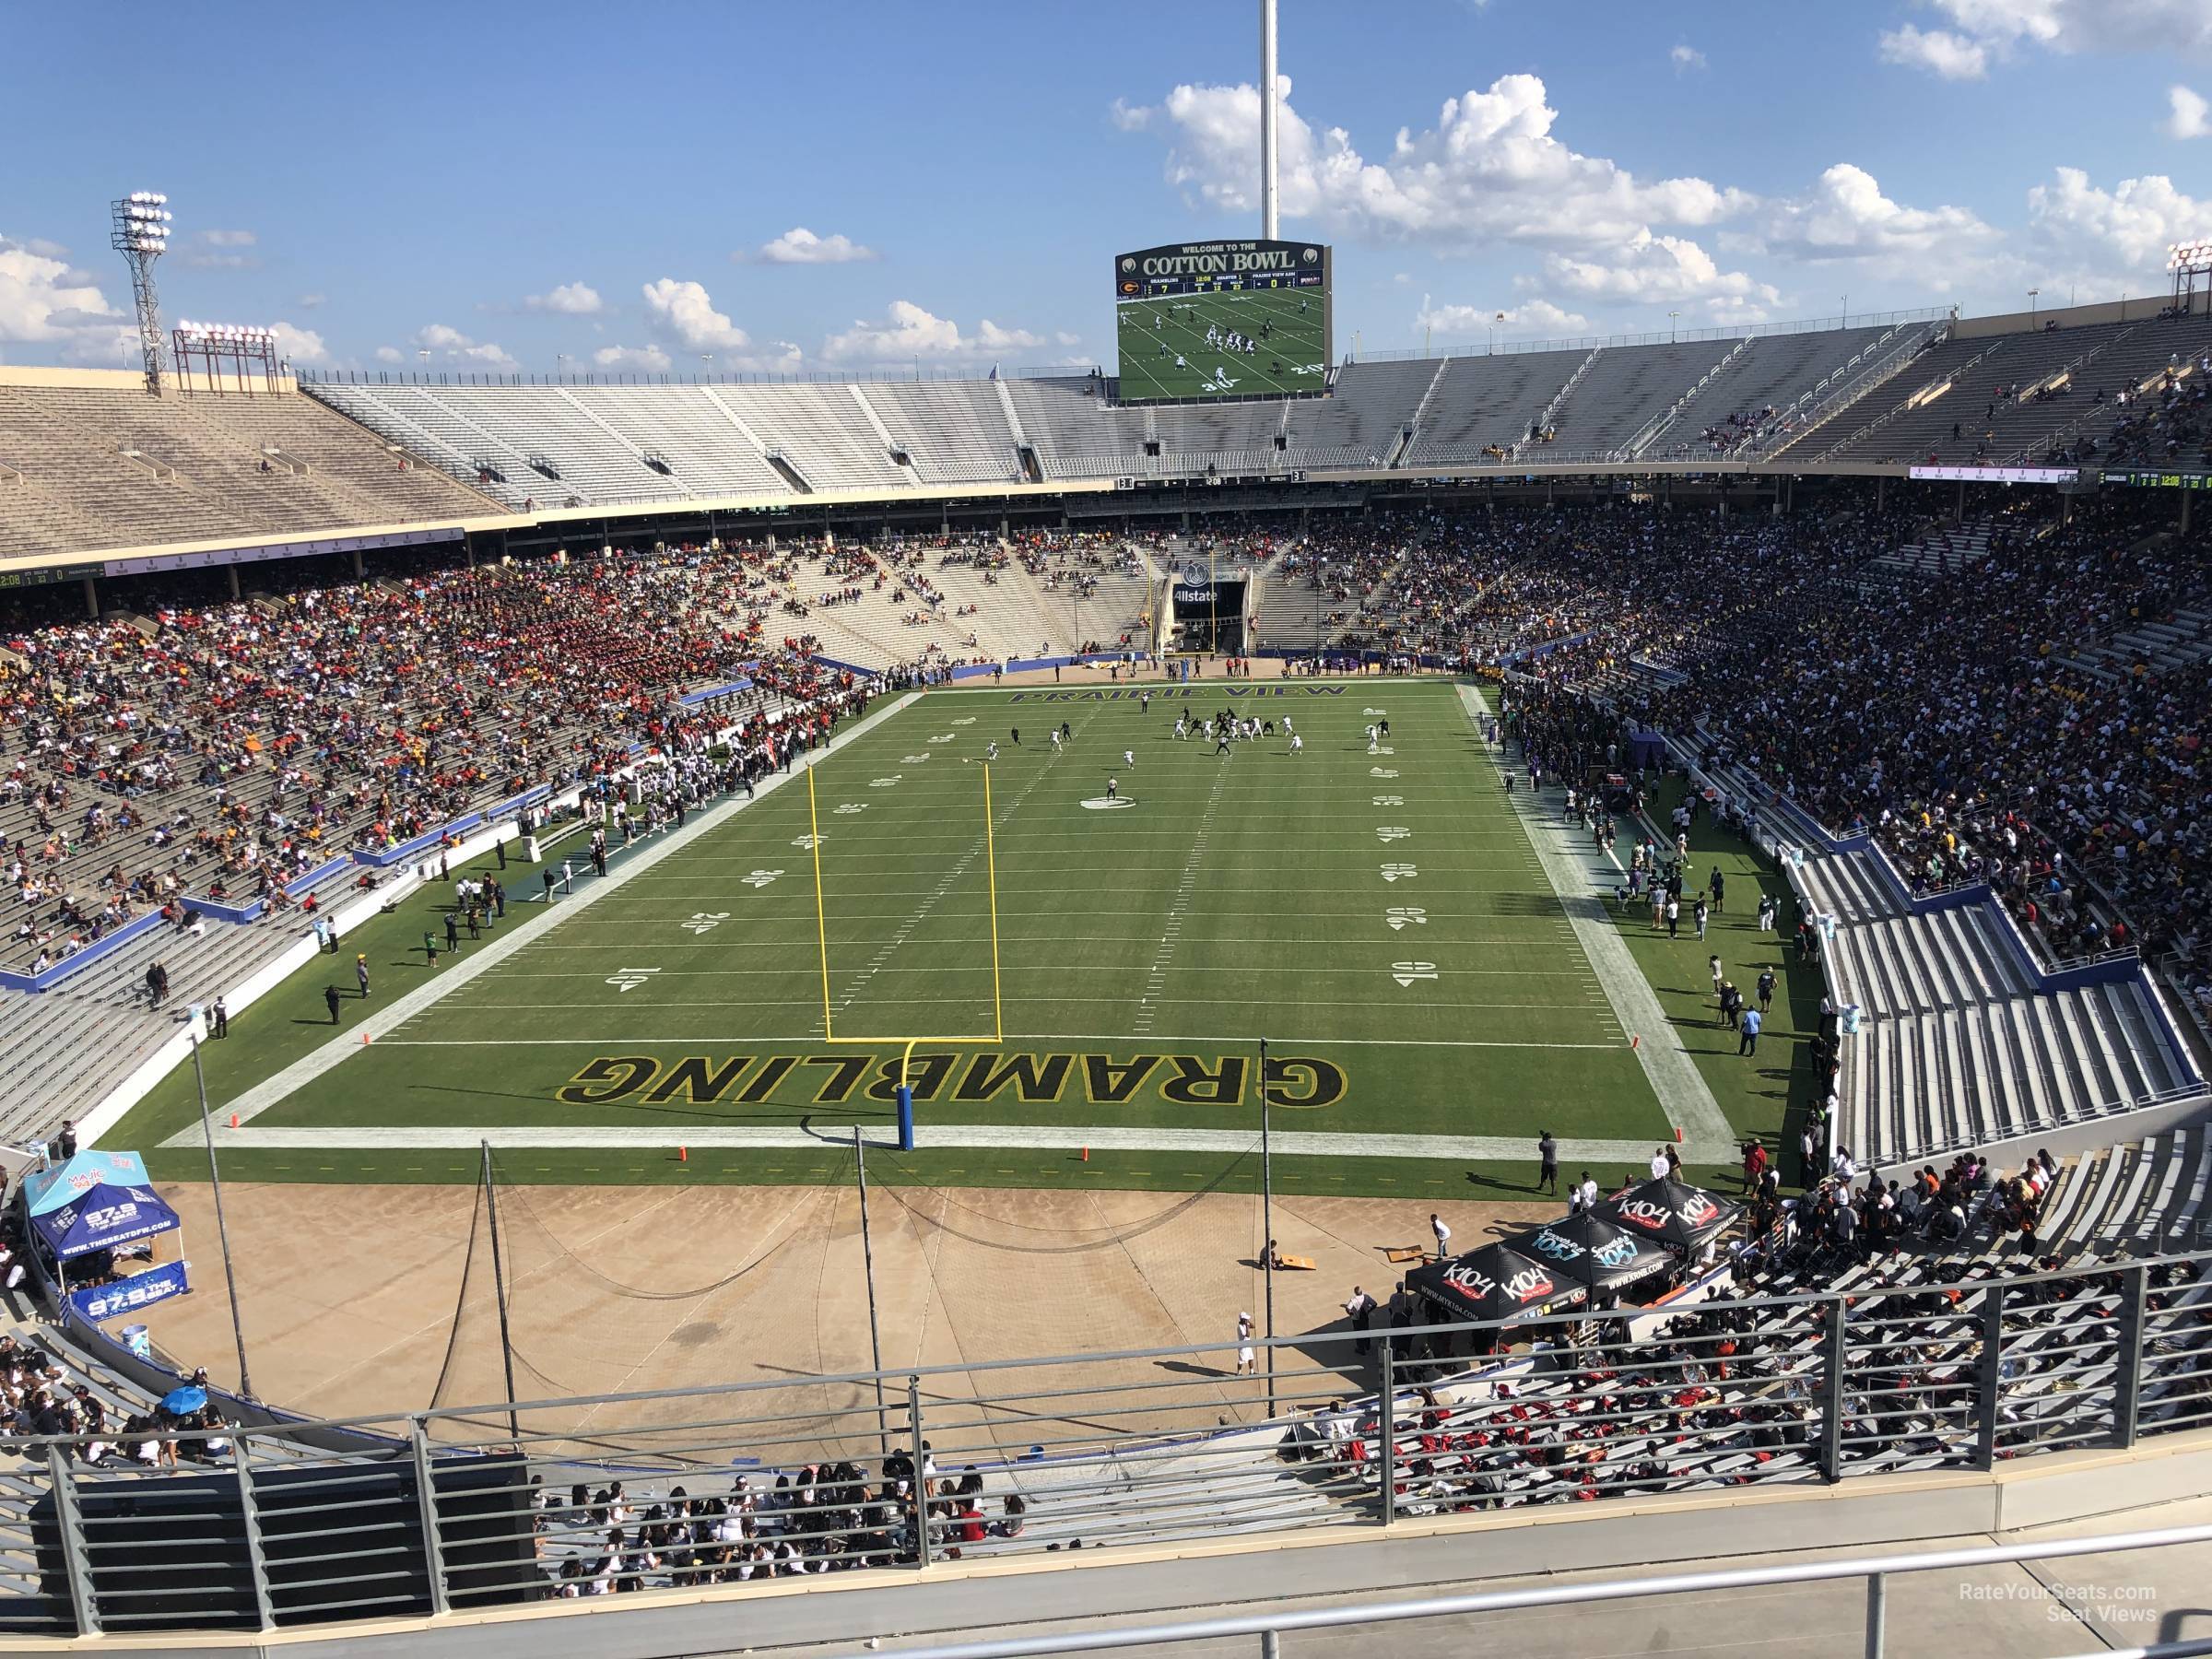 section 116, row 8 seat view  - cotton bowl